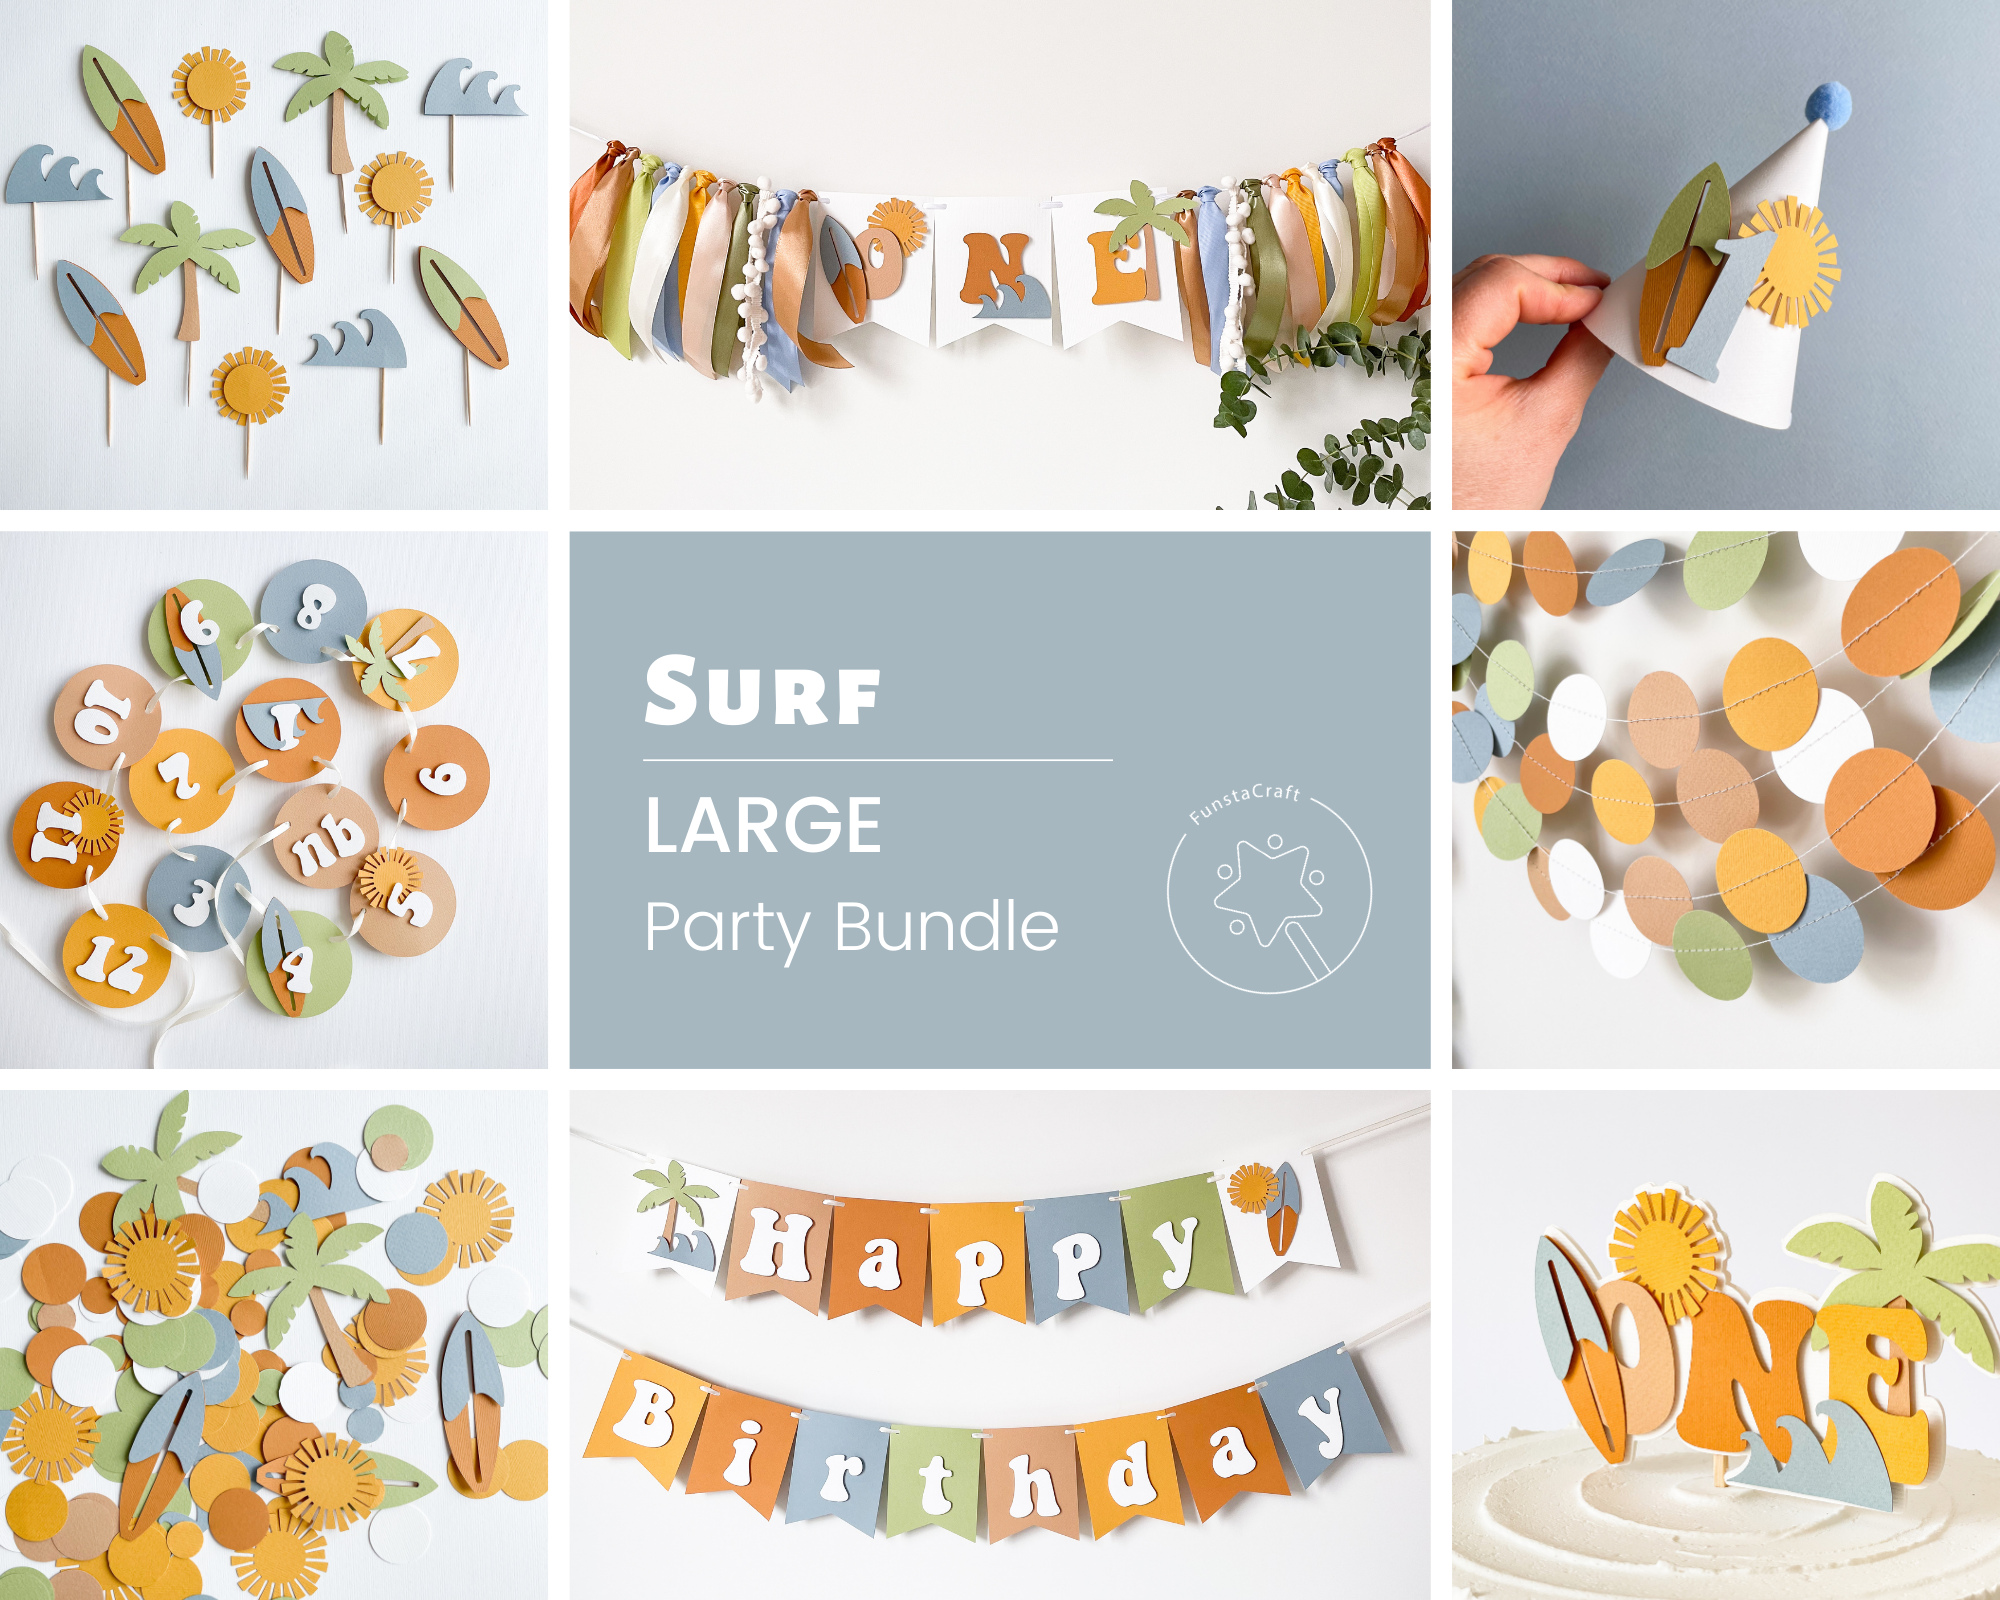 Surf 1st Birthday Party Bundle Retro Surf 1st Birthday Decorations The Big One Surf Themed Beach Summer Little Surfer Sun & Wave Surf Surfboard theme One Year of Surf Board party